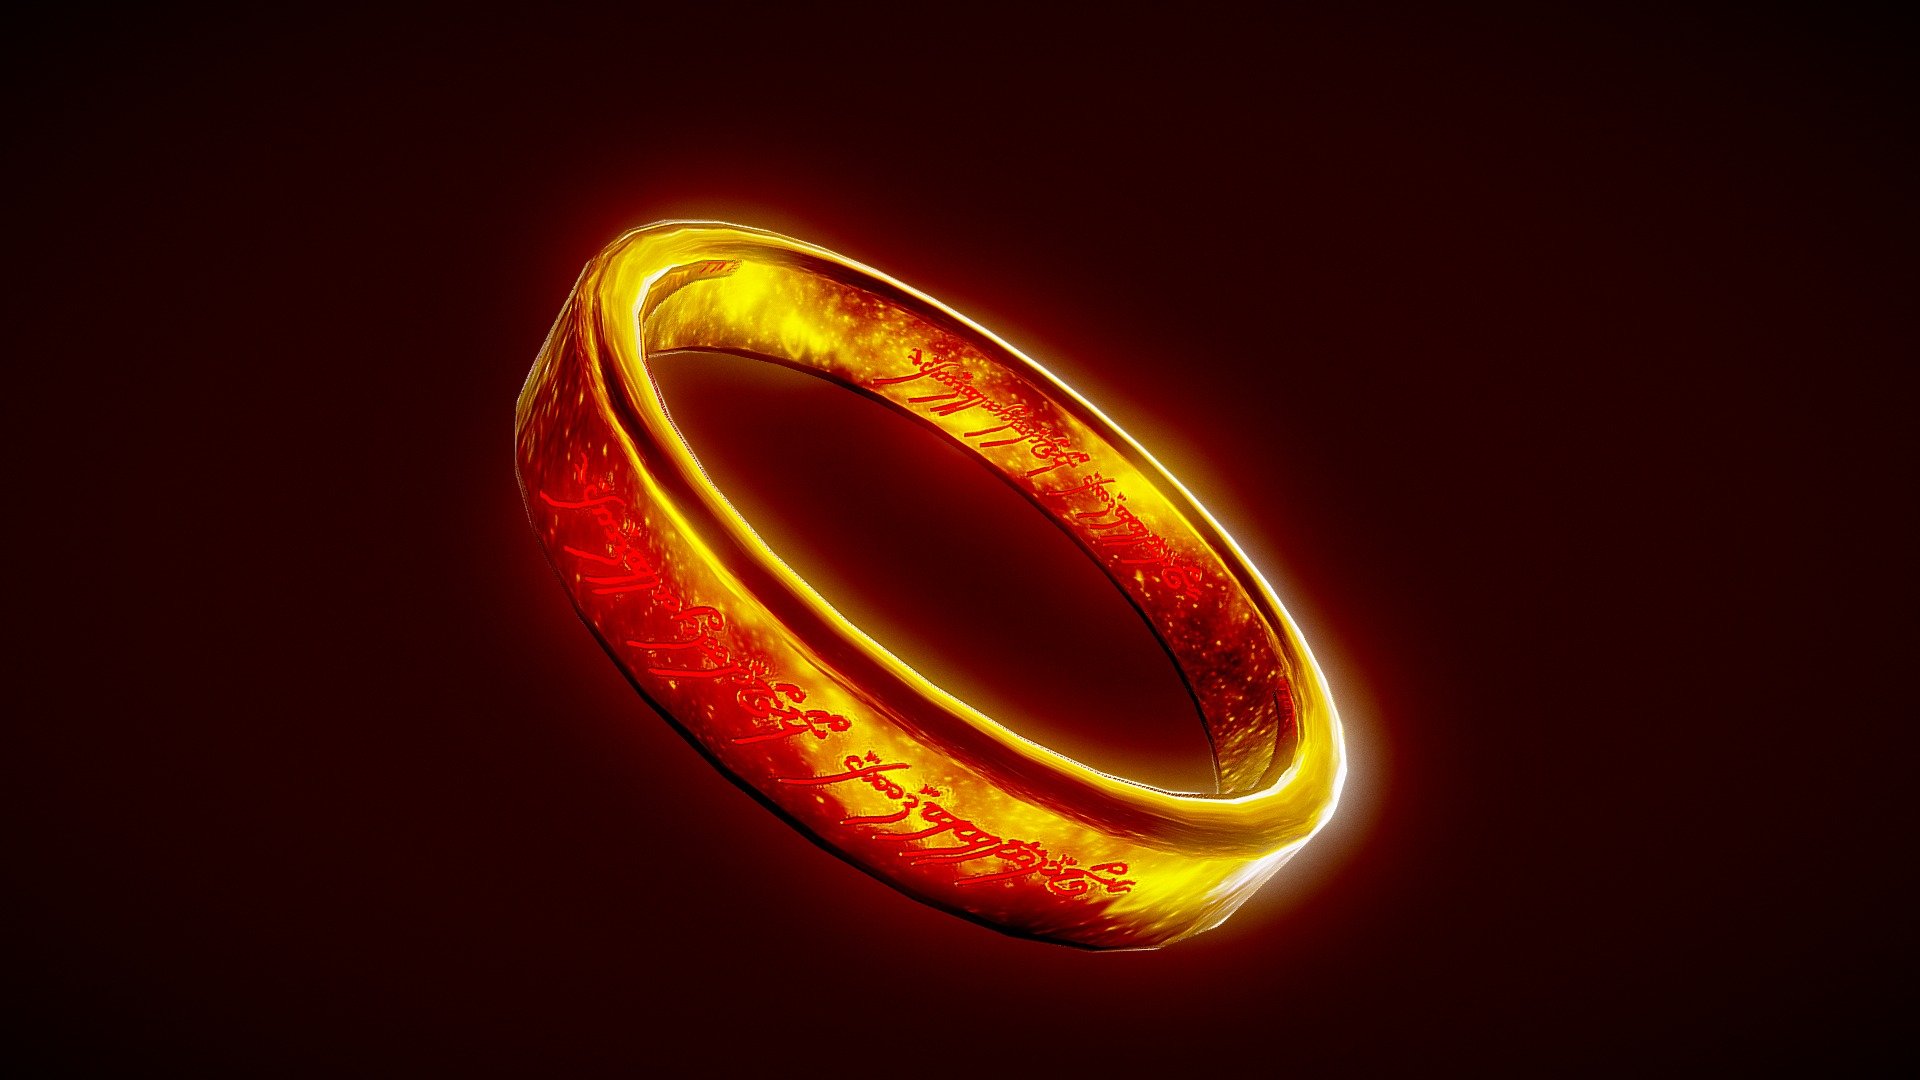 the-one-ring-lord-of-the-rings-download-free-3d-model-by-yanez